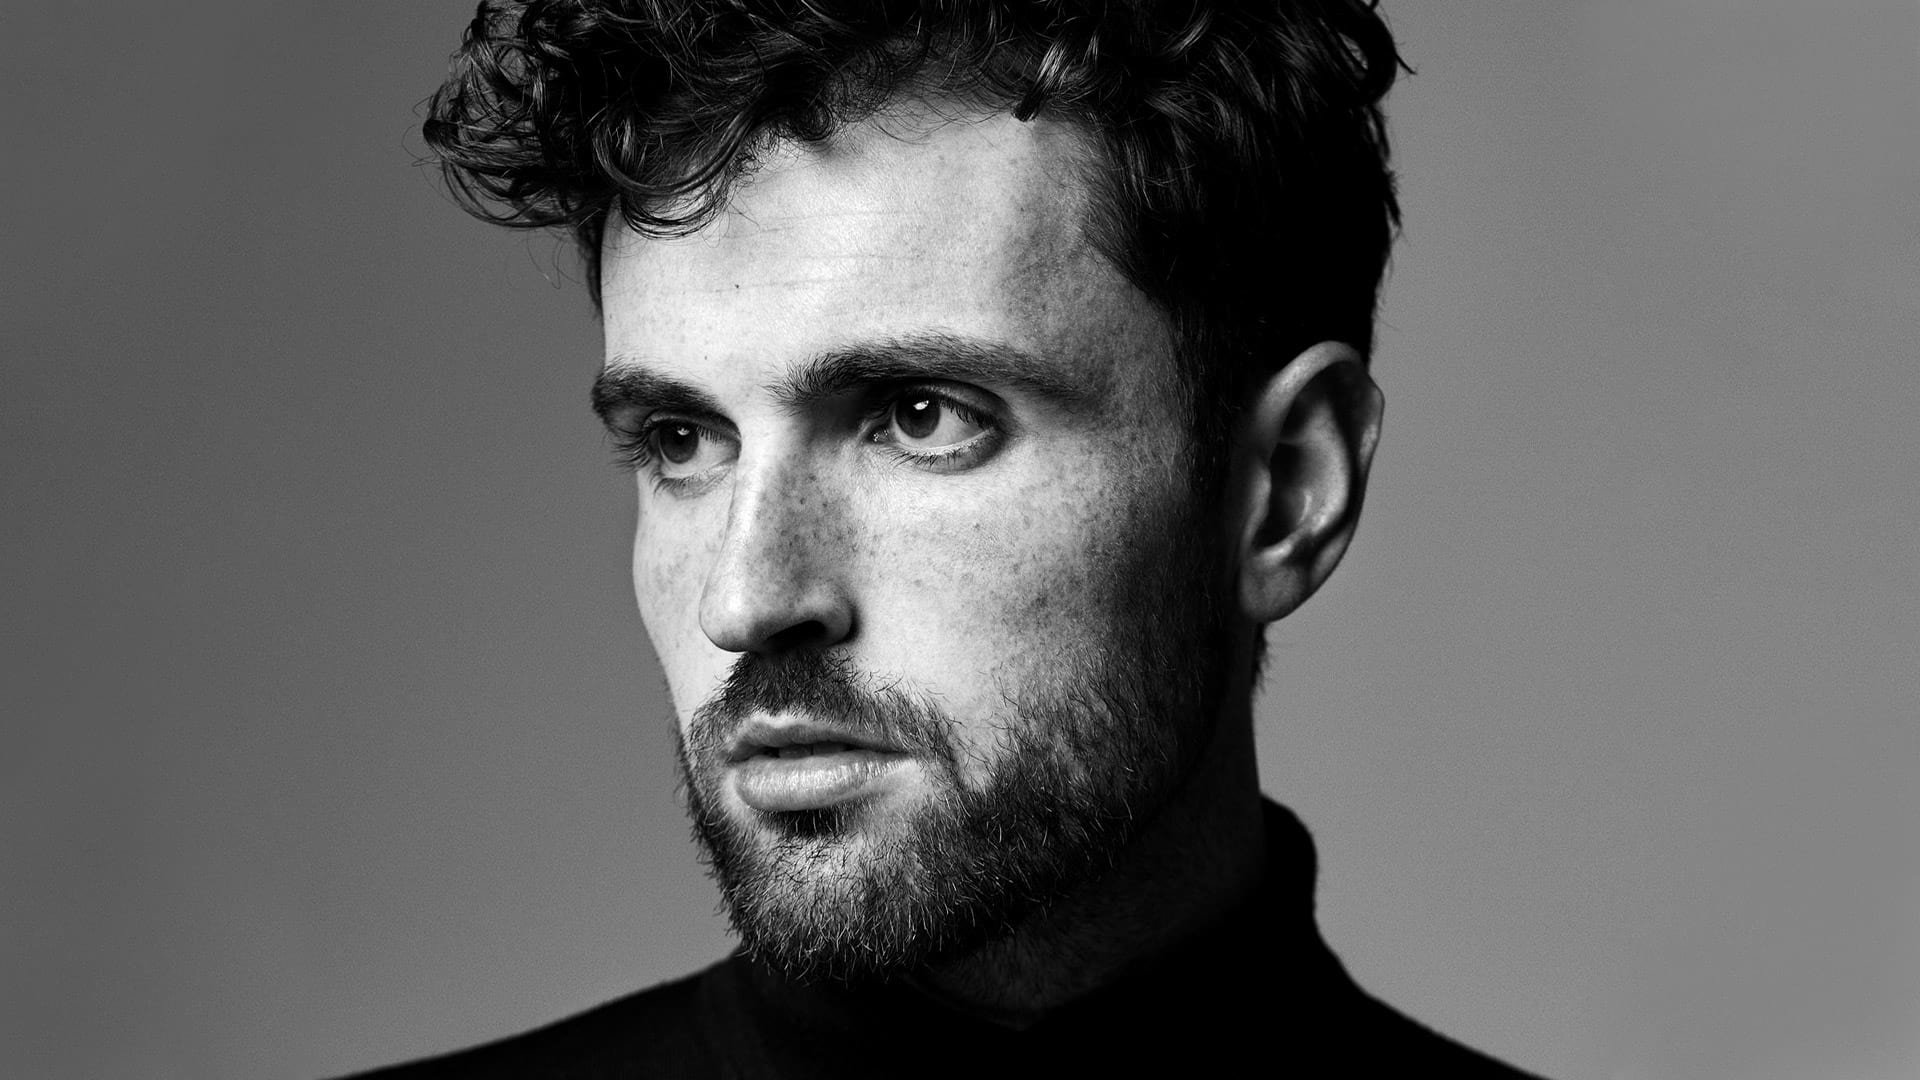 Duncan Laurence HD Wallpaper Background Image 1920x1080 1920x1080